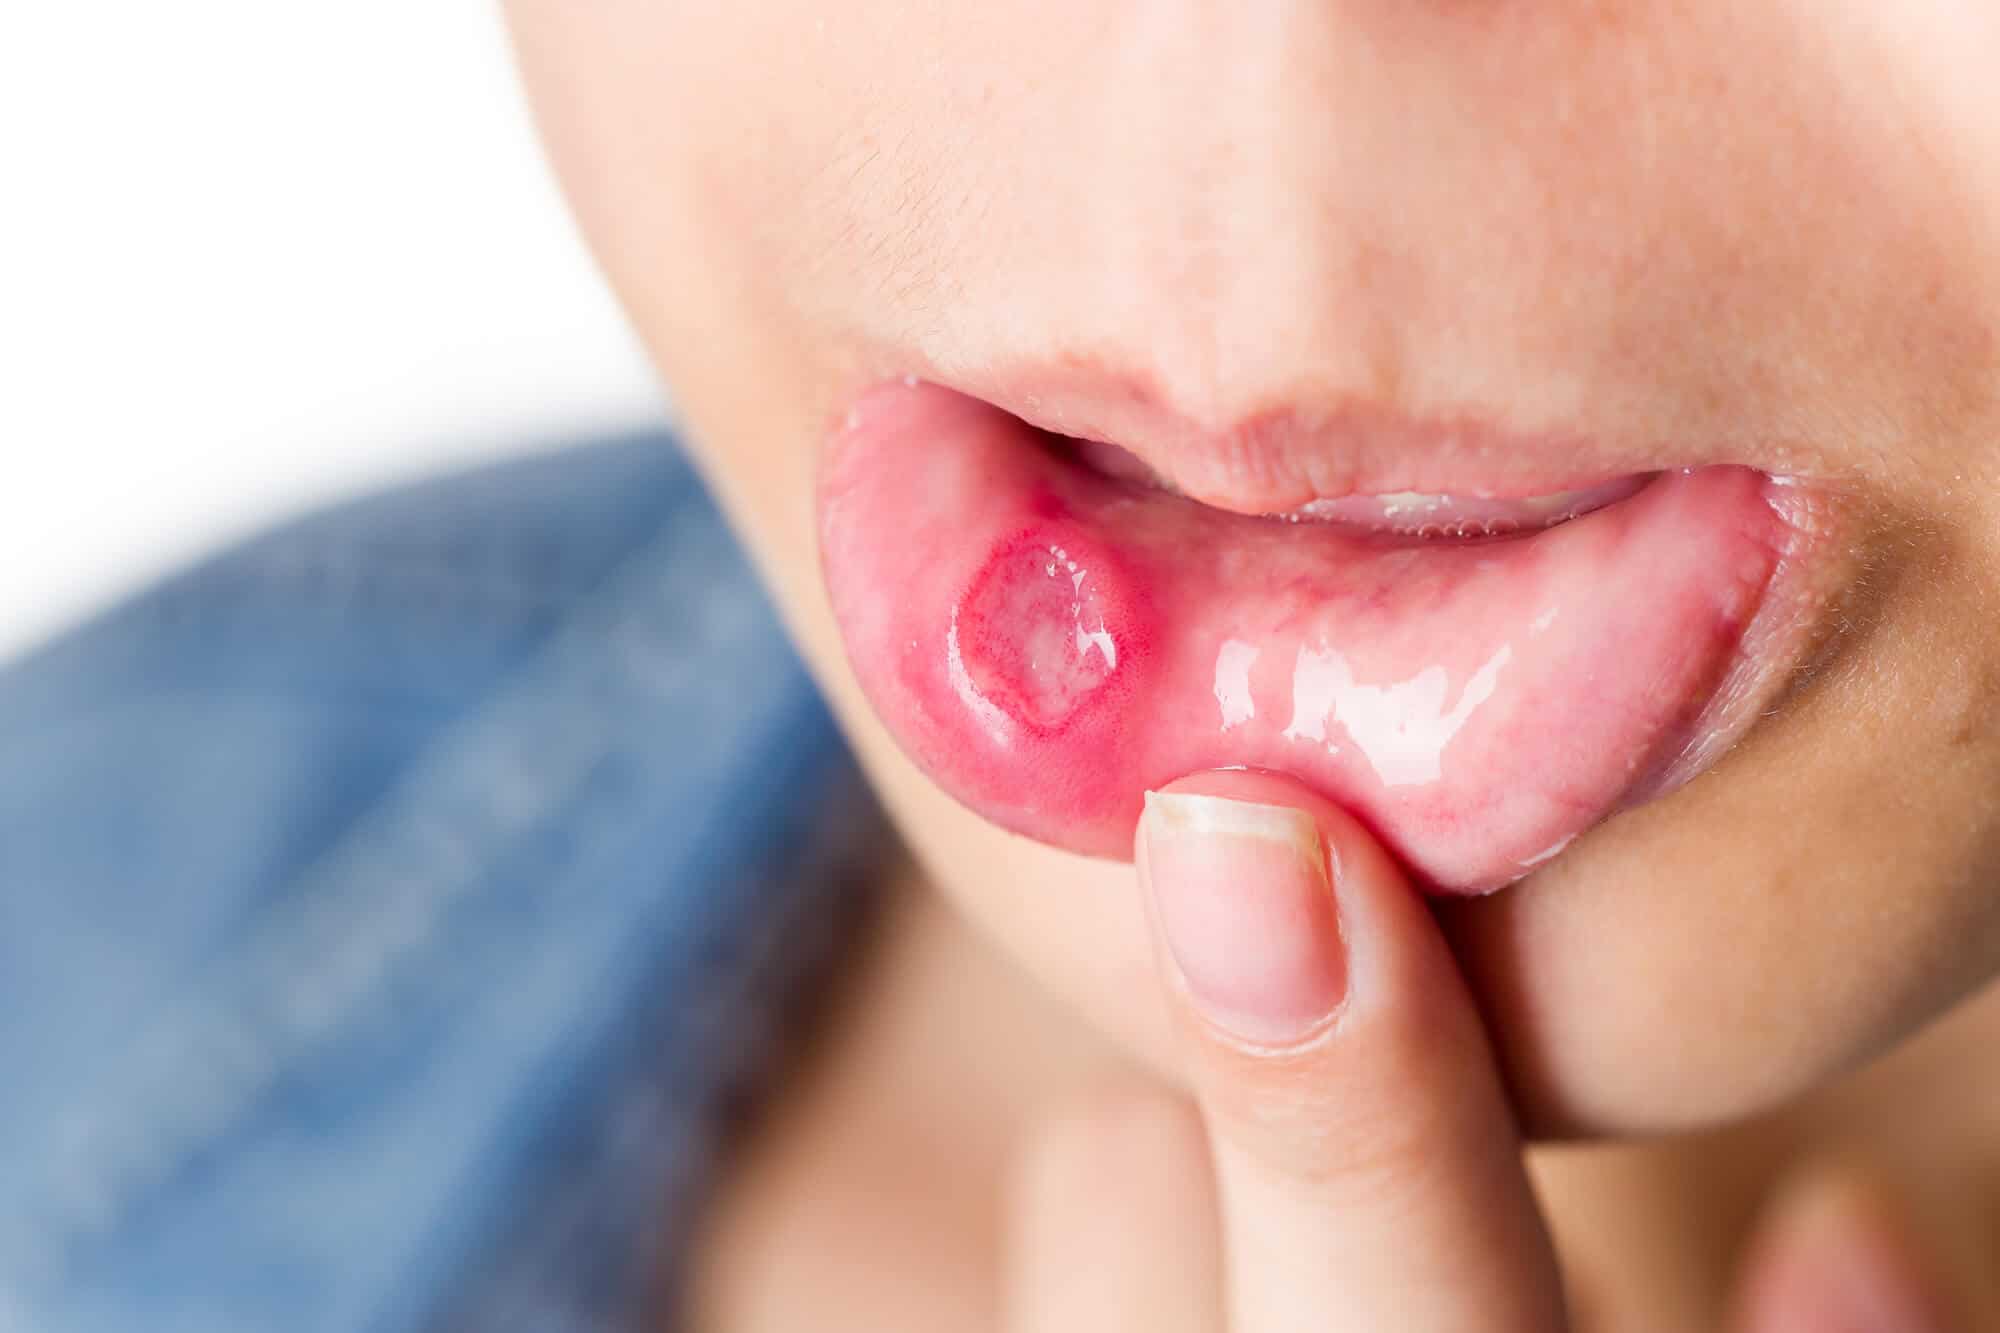 How to treat a cold sore?